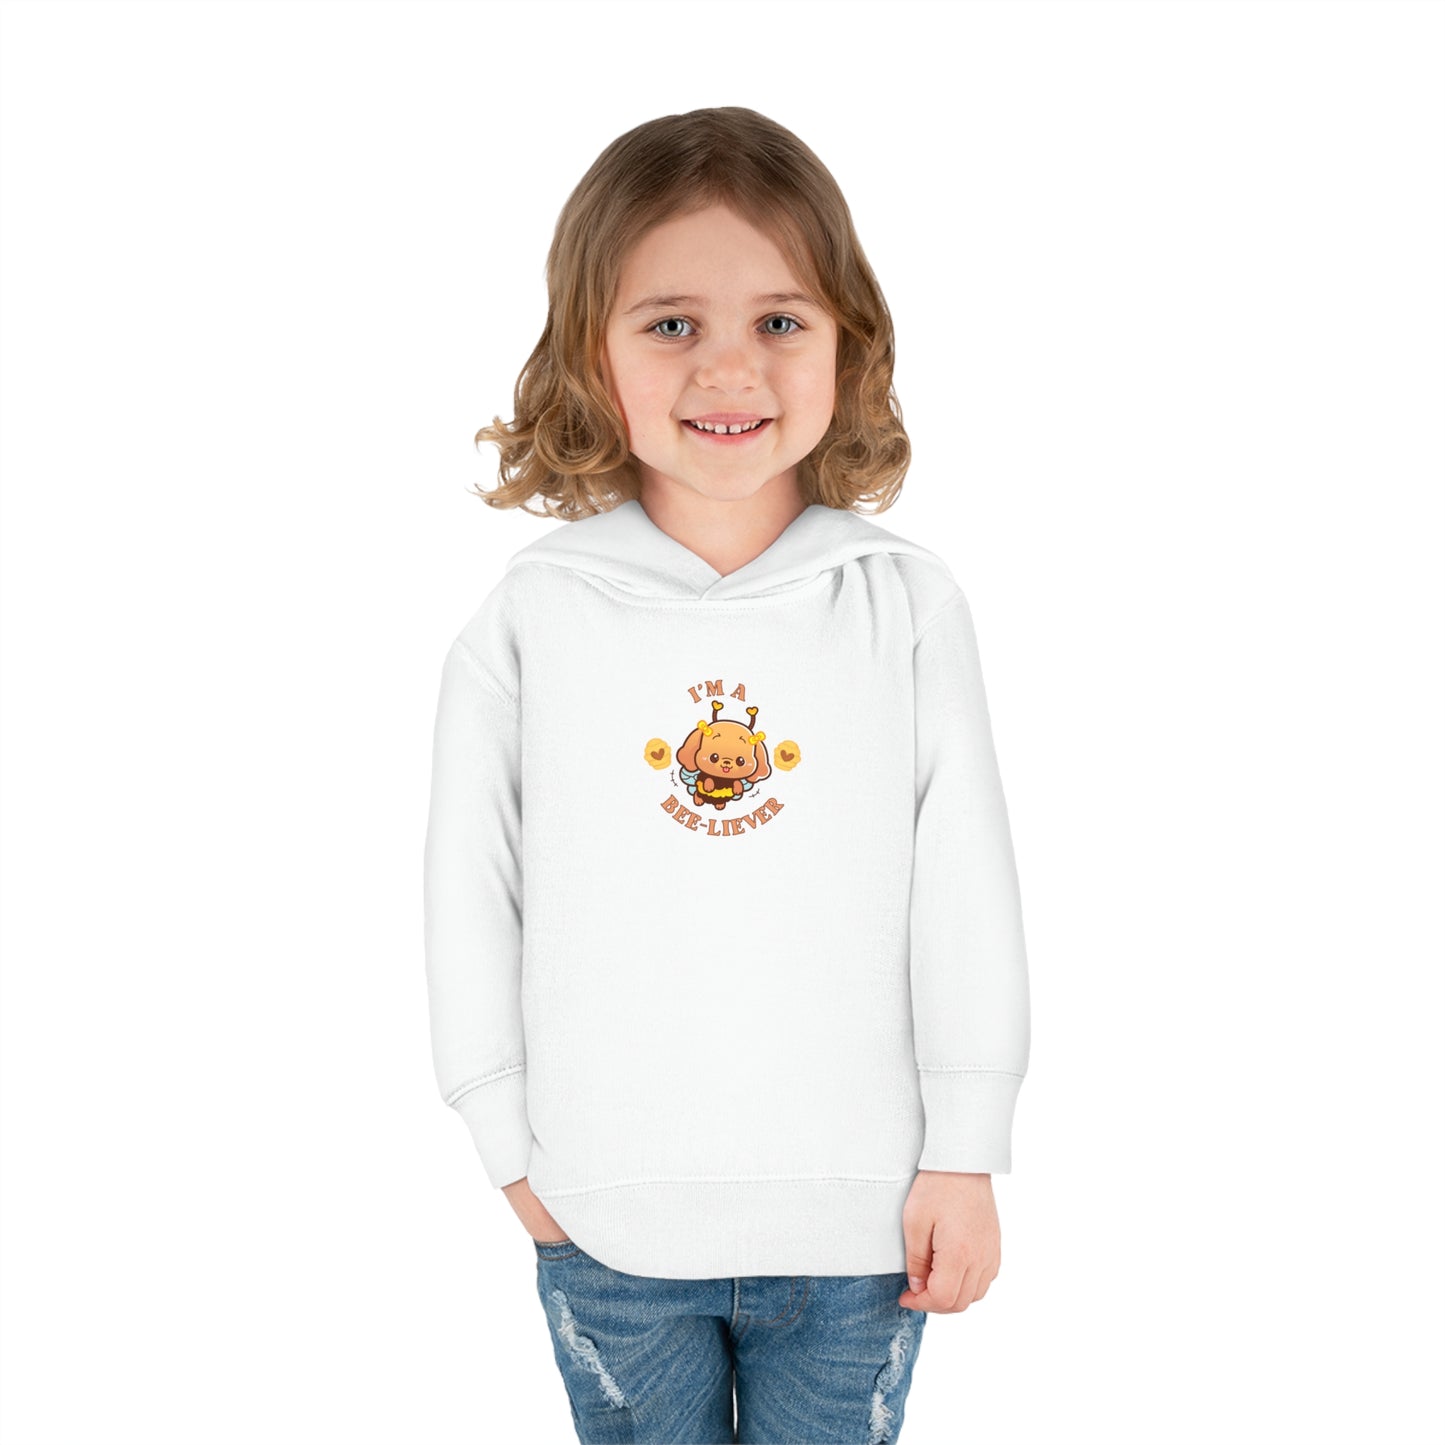 Believer Pullover Fleece Children's Hoodie, Christian Pullover for Kids, Jesus Hoodie, Toddler & Youth Faith Apparel